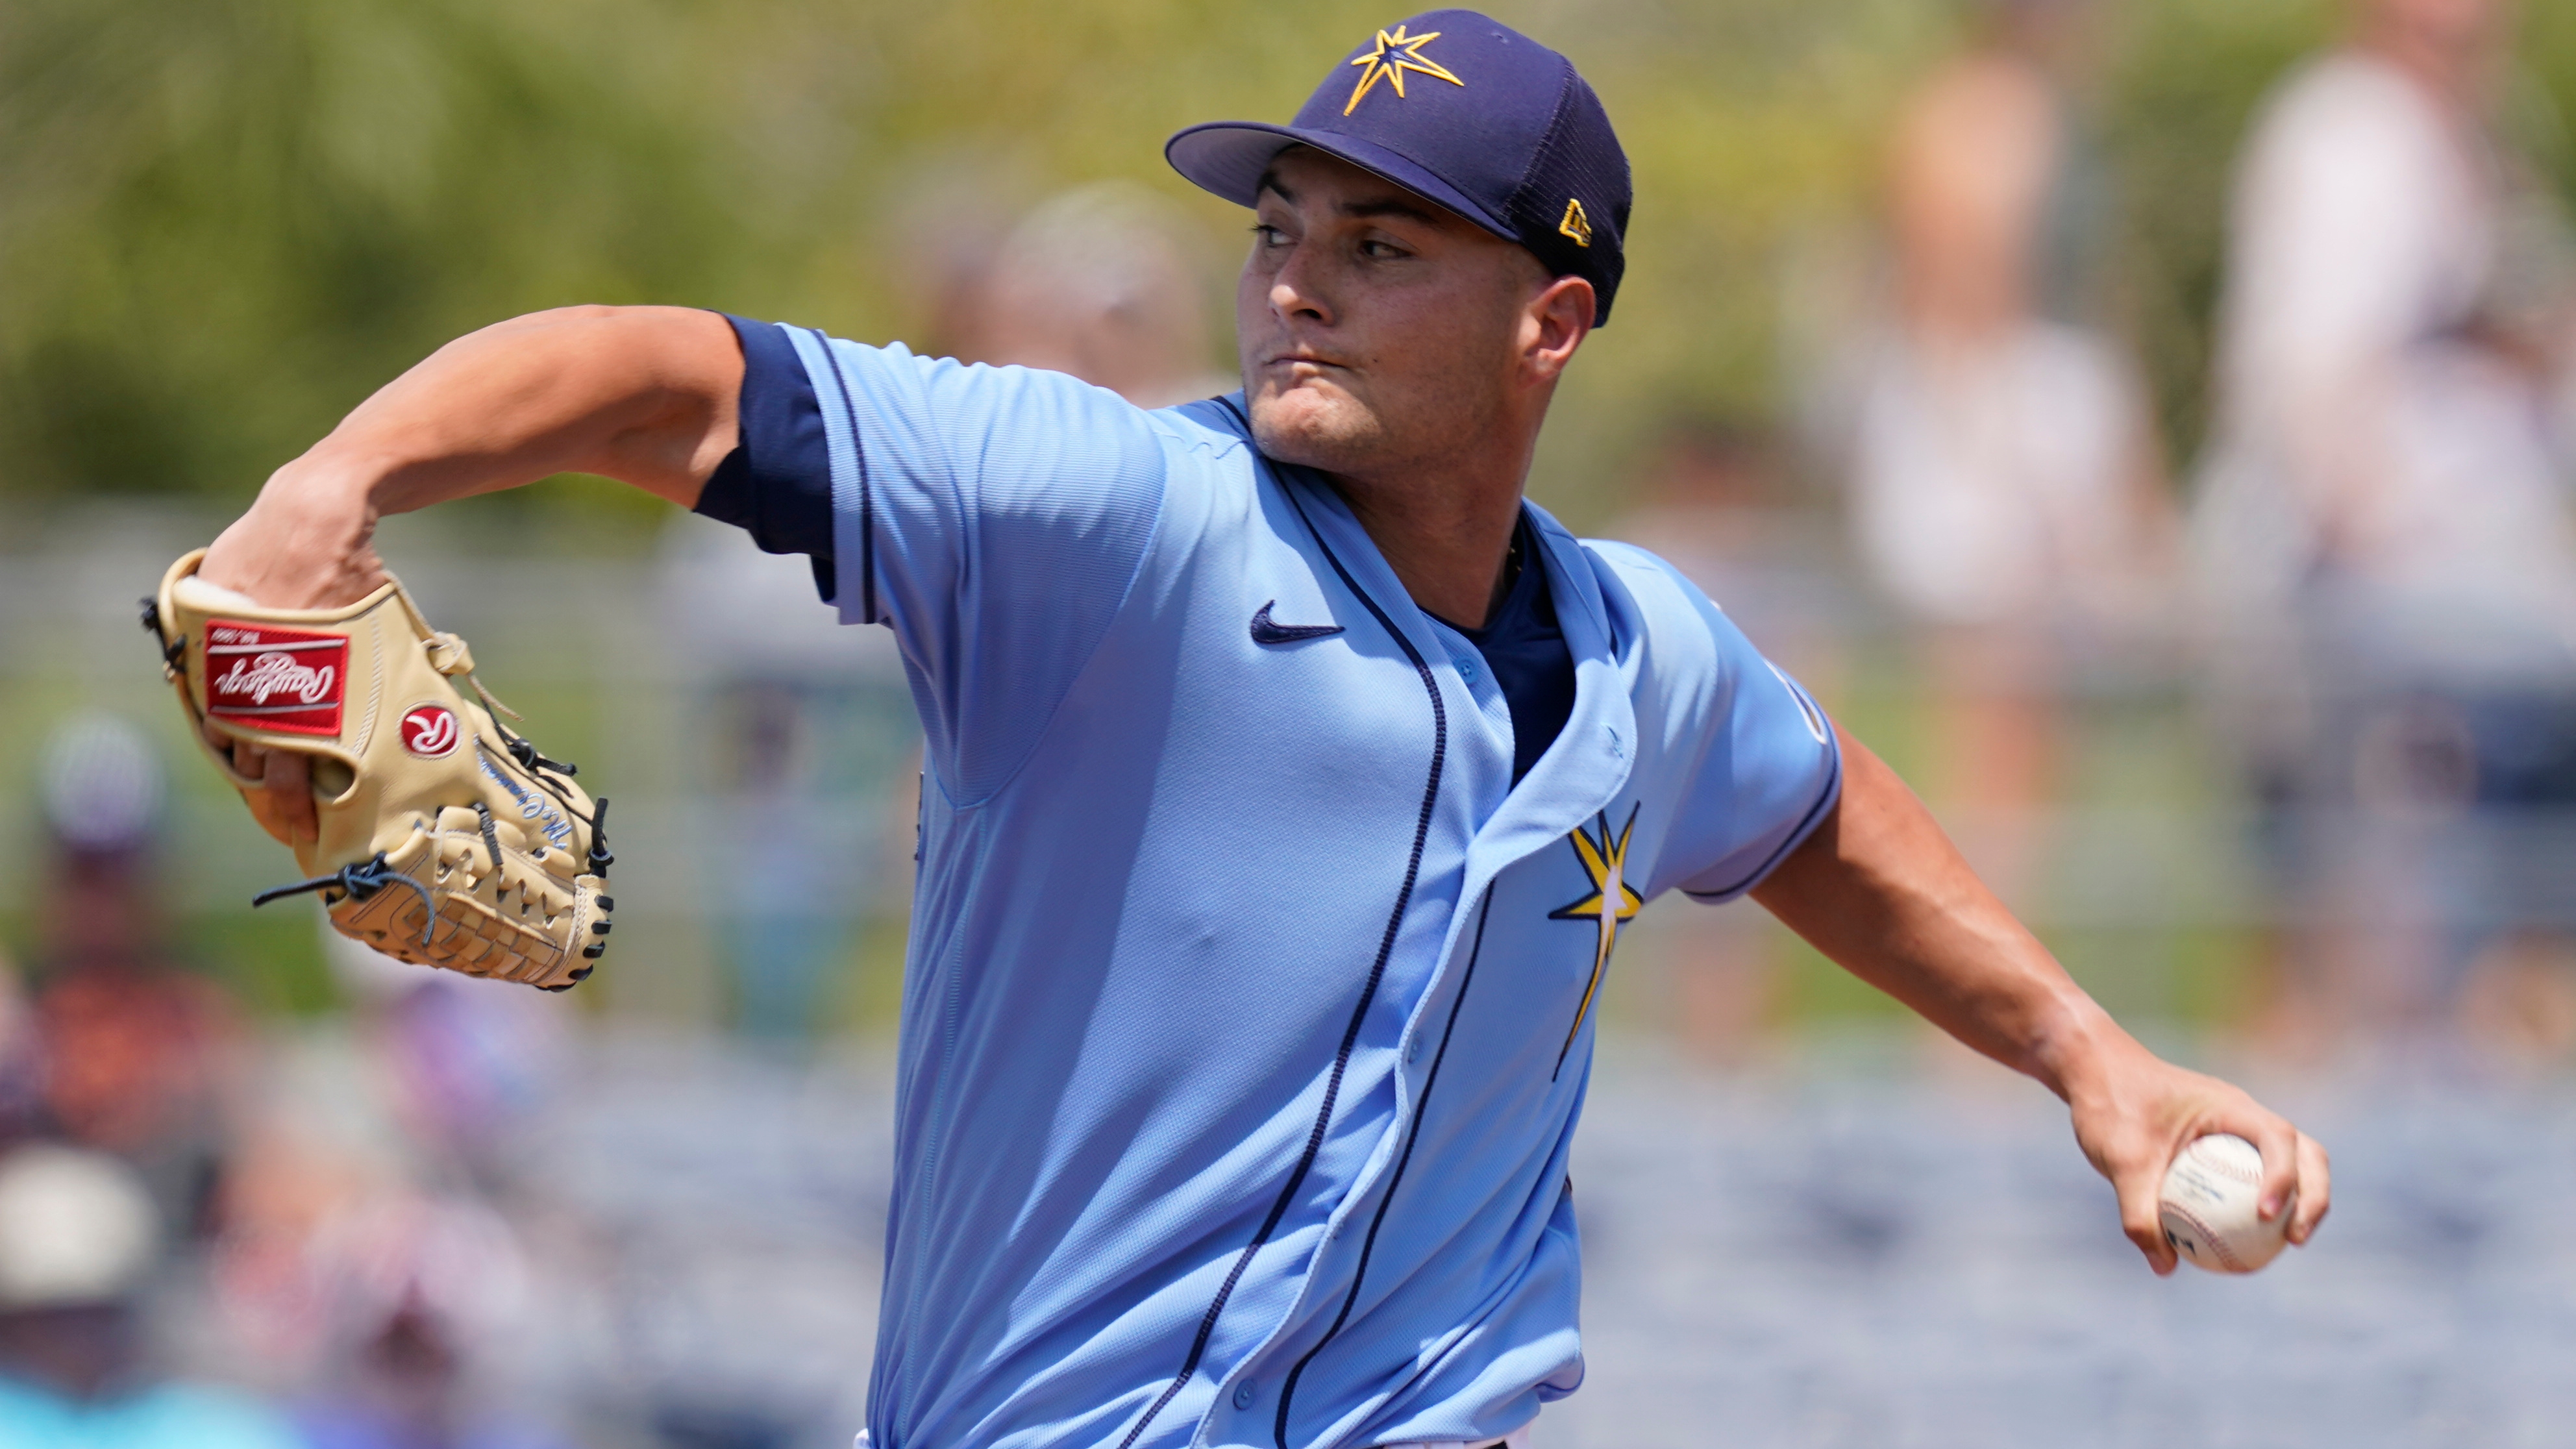 Shane McClanahan among Rays' spring roster cuts